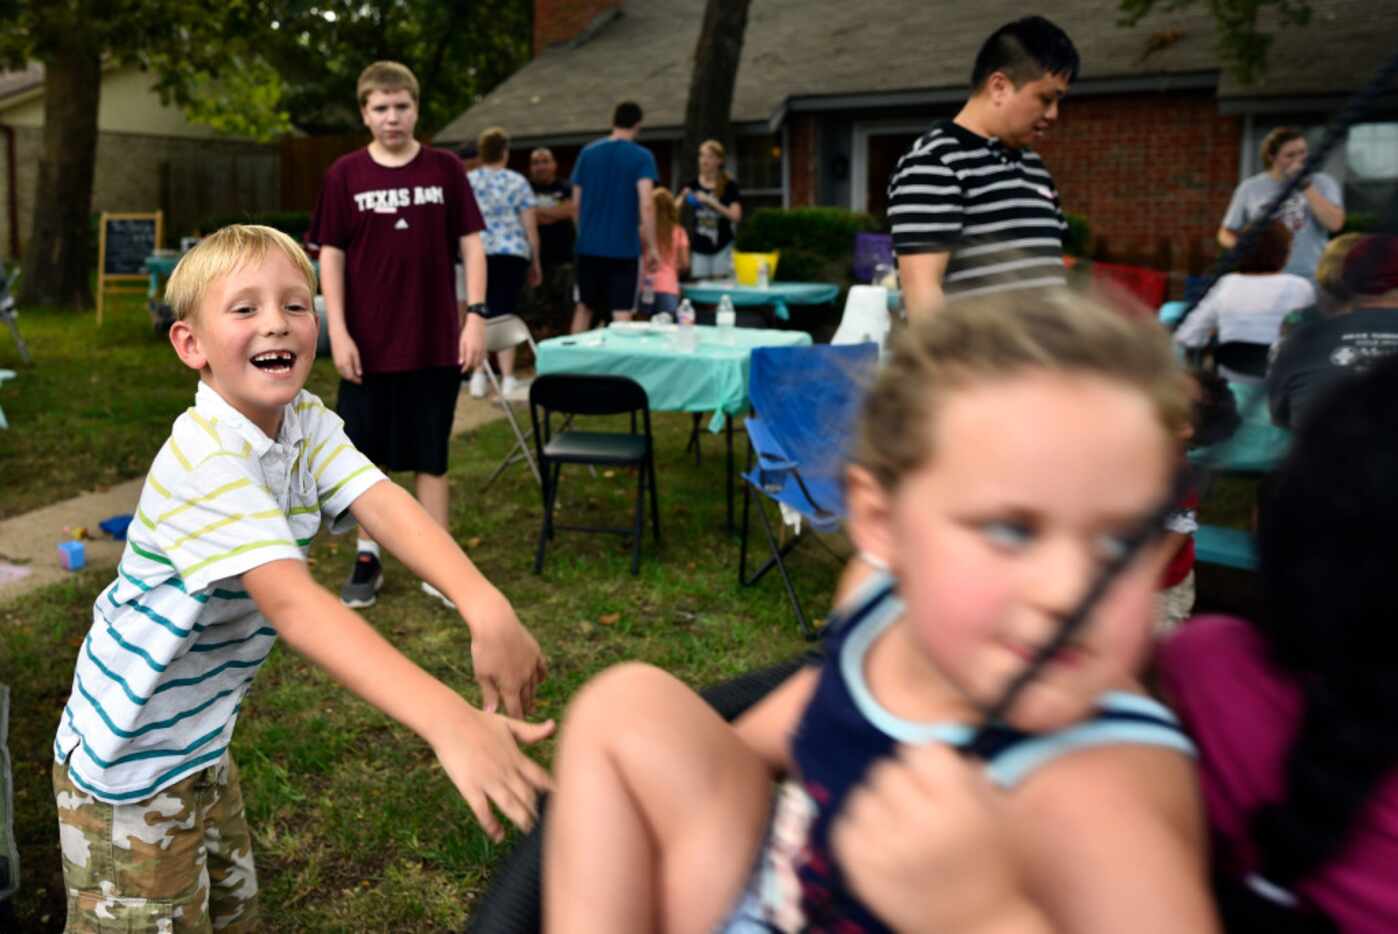 Luke Raleigh, 7, pushes a group of kids on a swing during Laura Daulton's turquoise table...